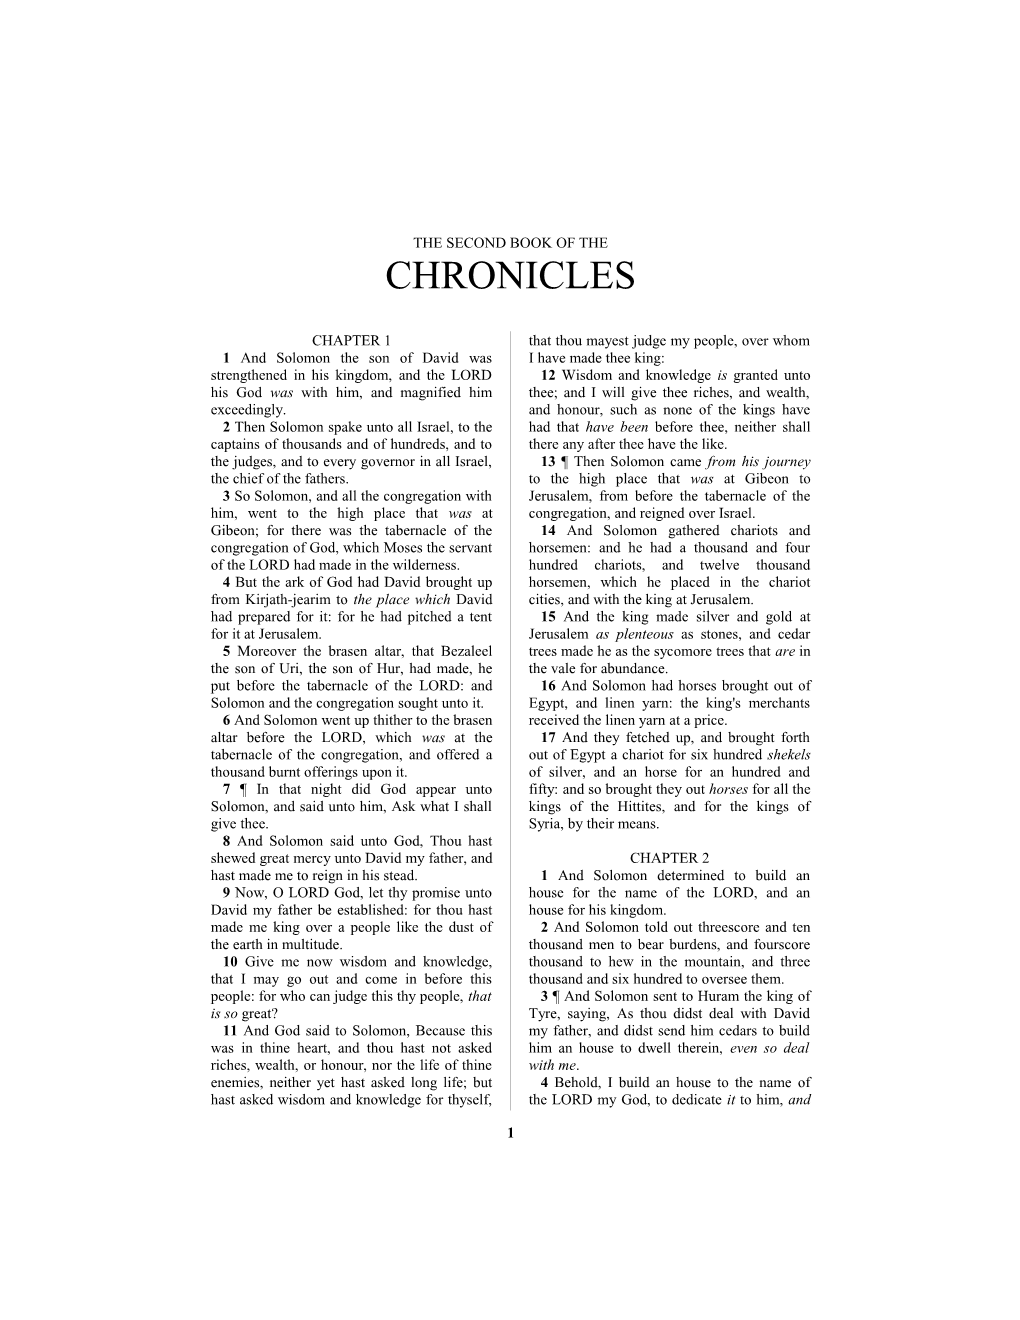 The Second Book of the Chronicles